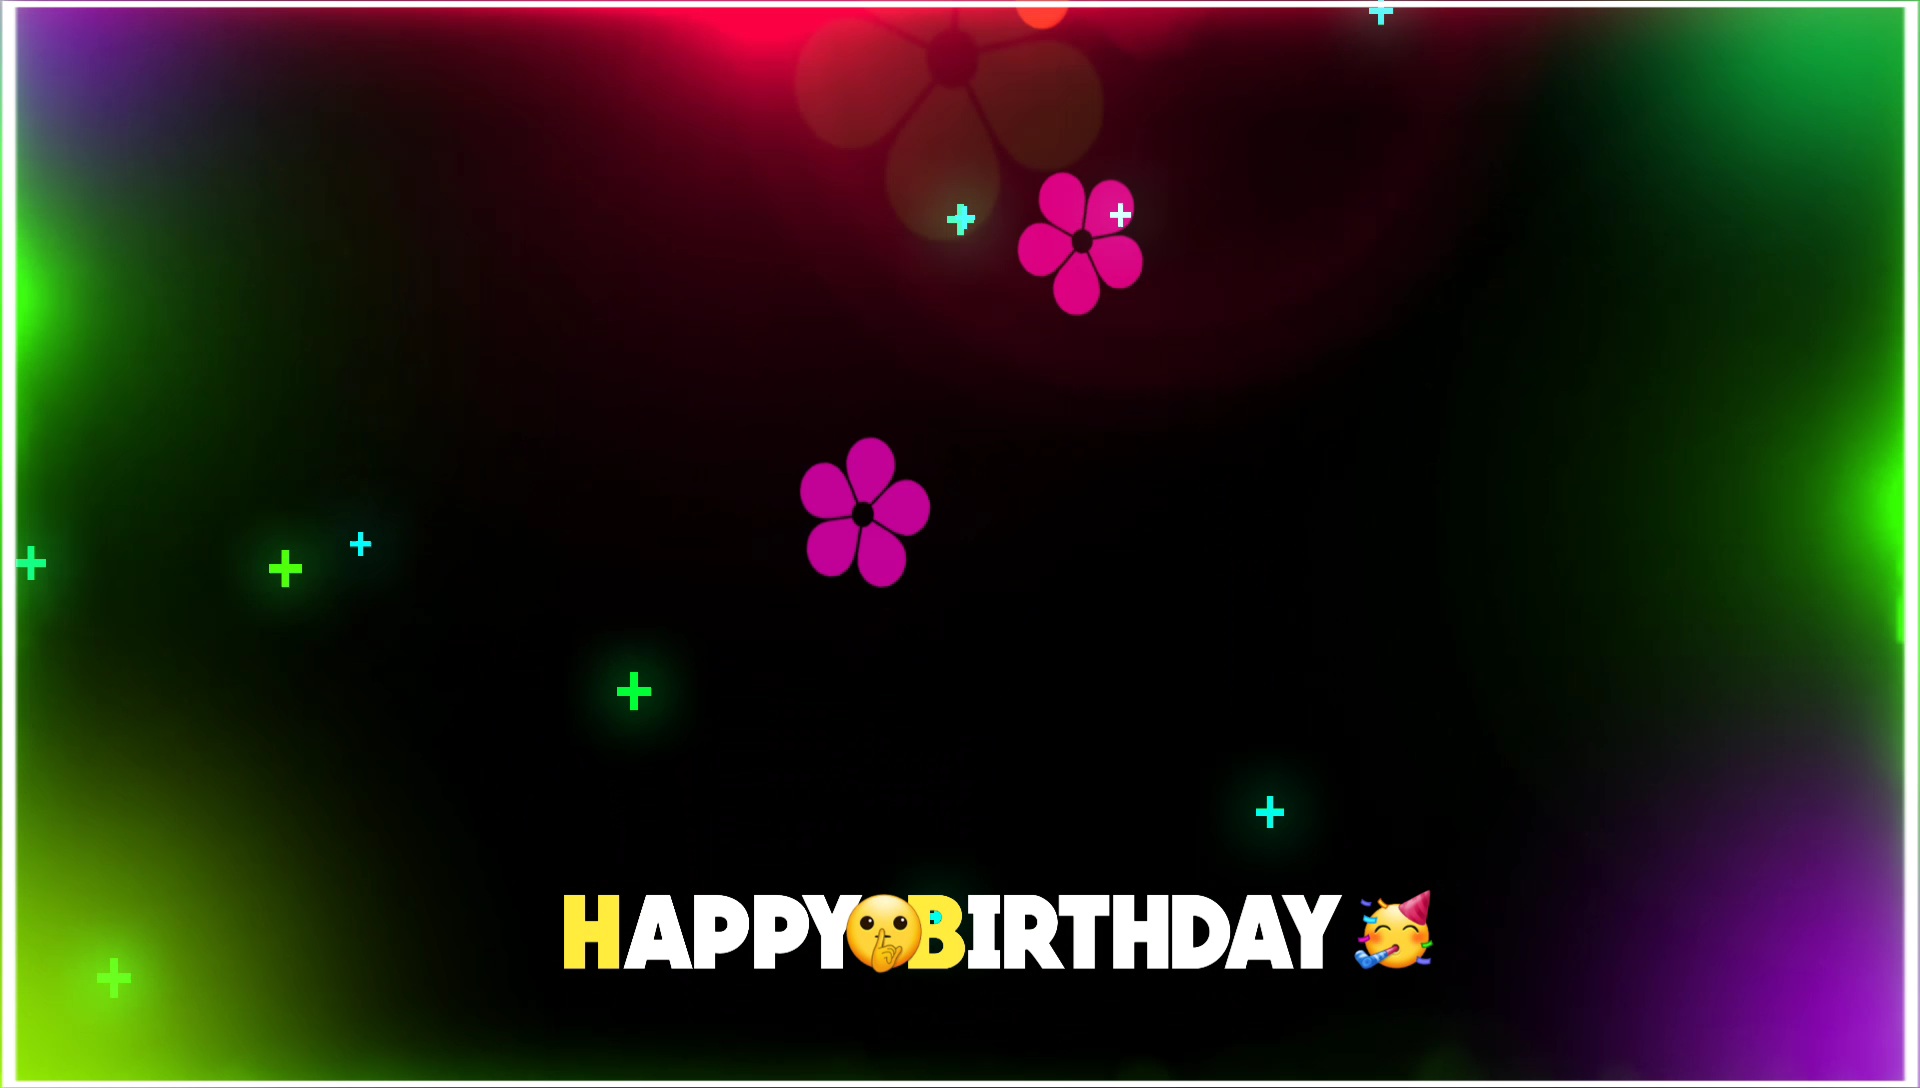 Happy birthday avee player template video background video effect